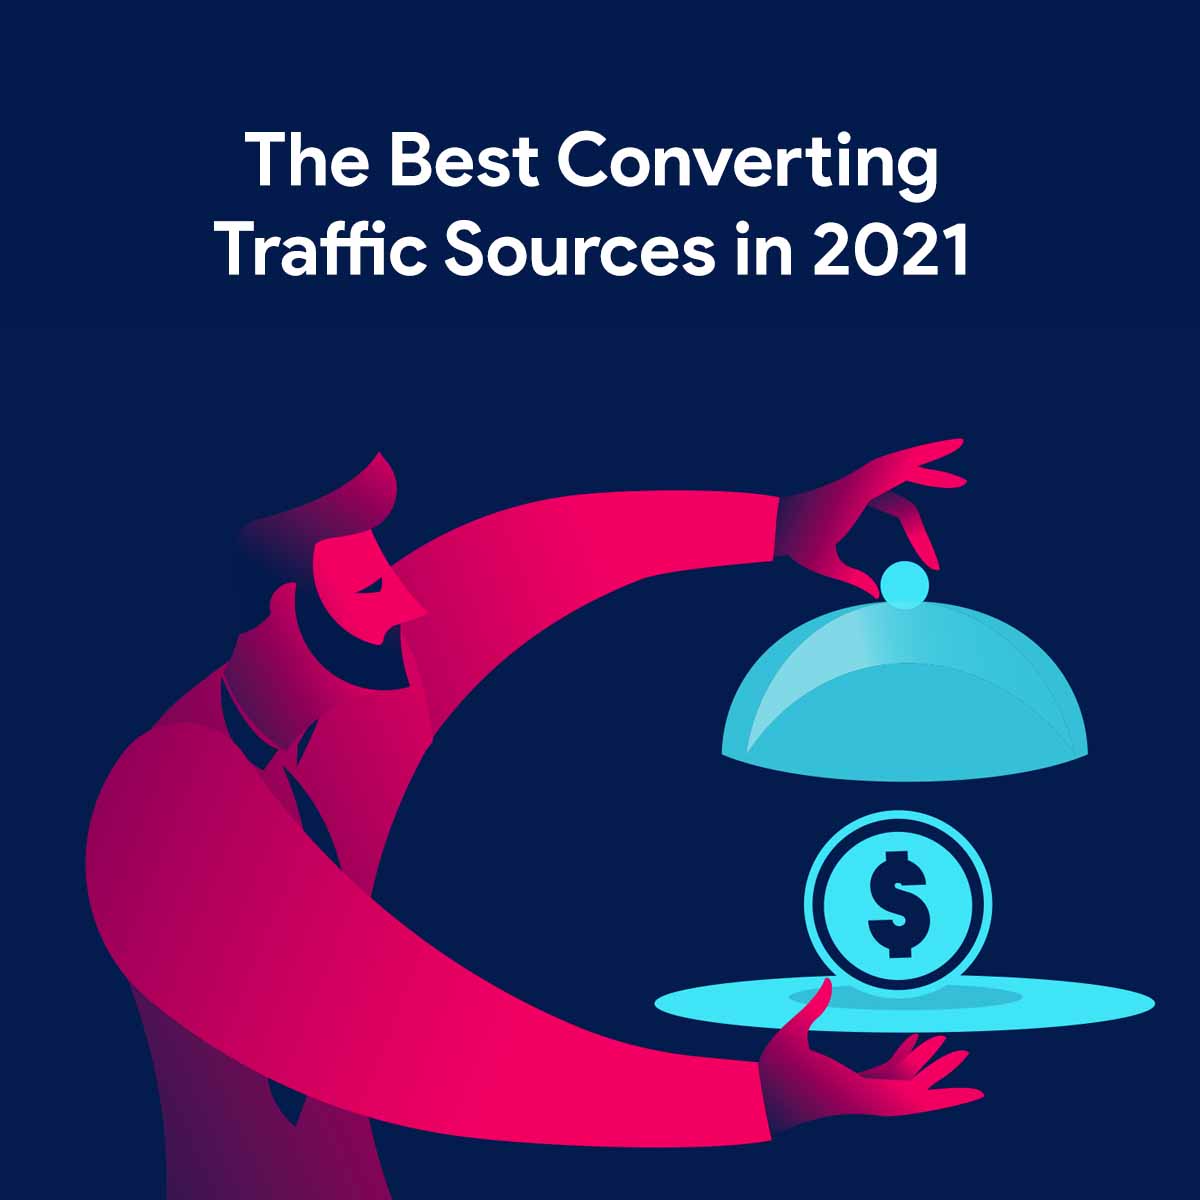 eBook - The best converting traffic sources in 2021